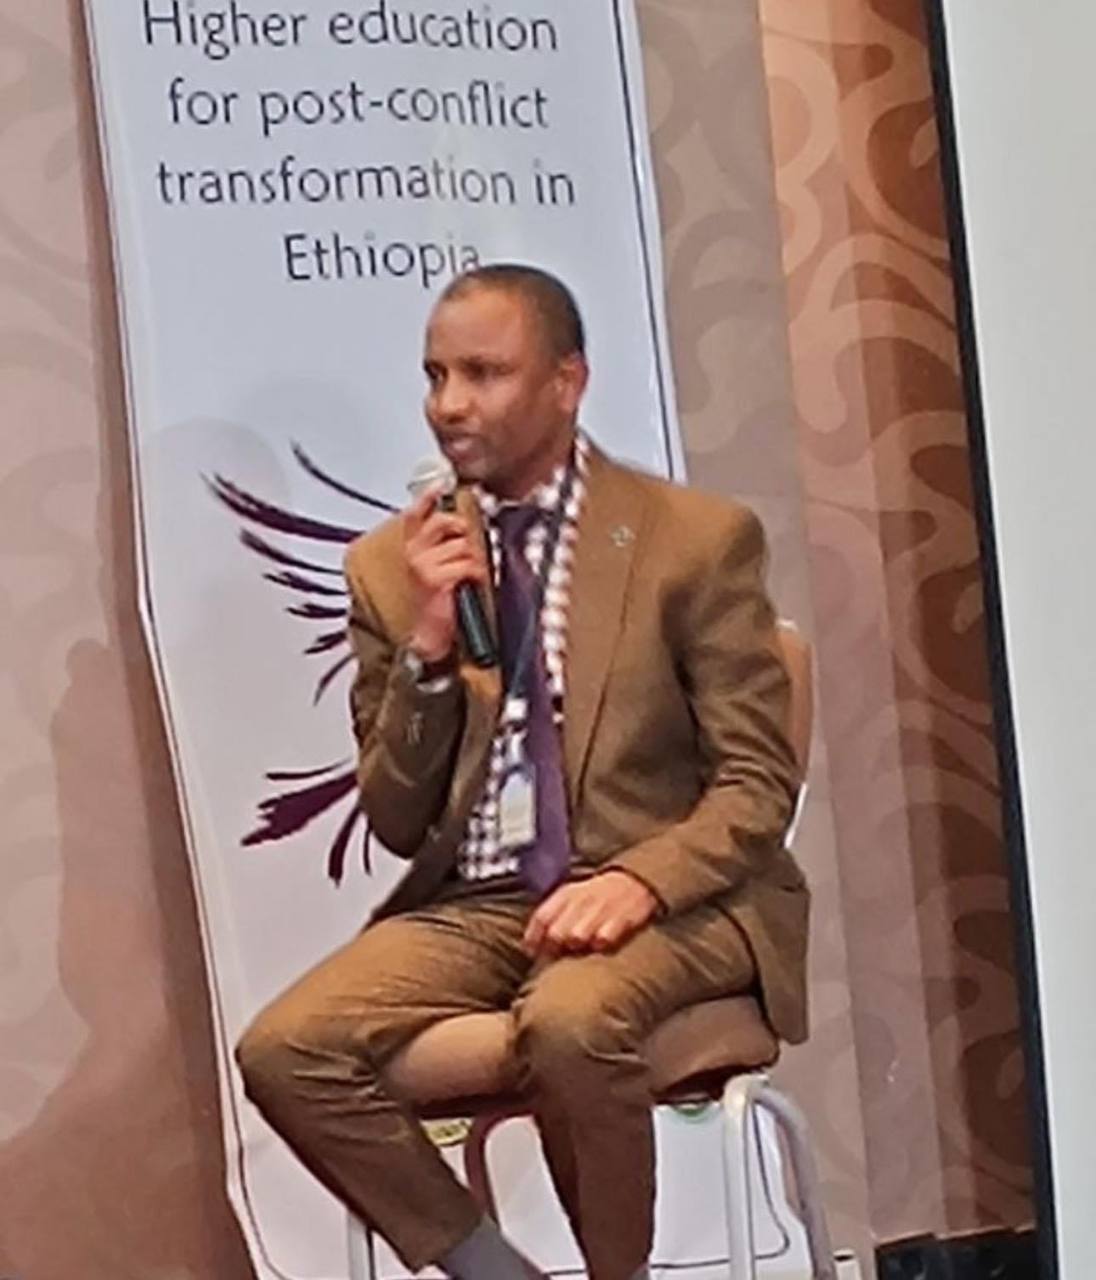 A Symposium on “Higher Education for Post-conflict Transformation in Ethiopia”